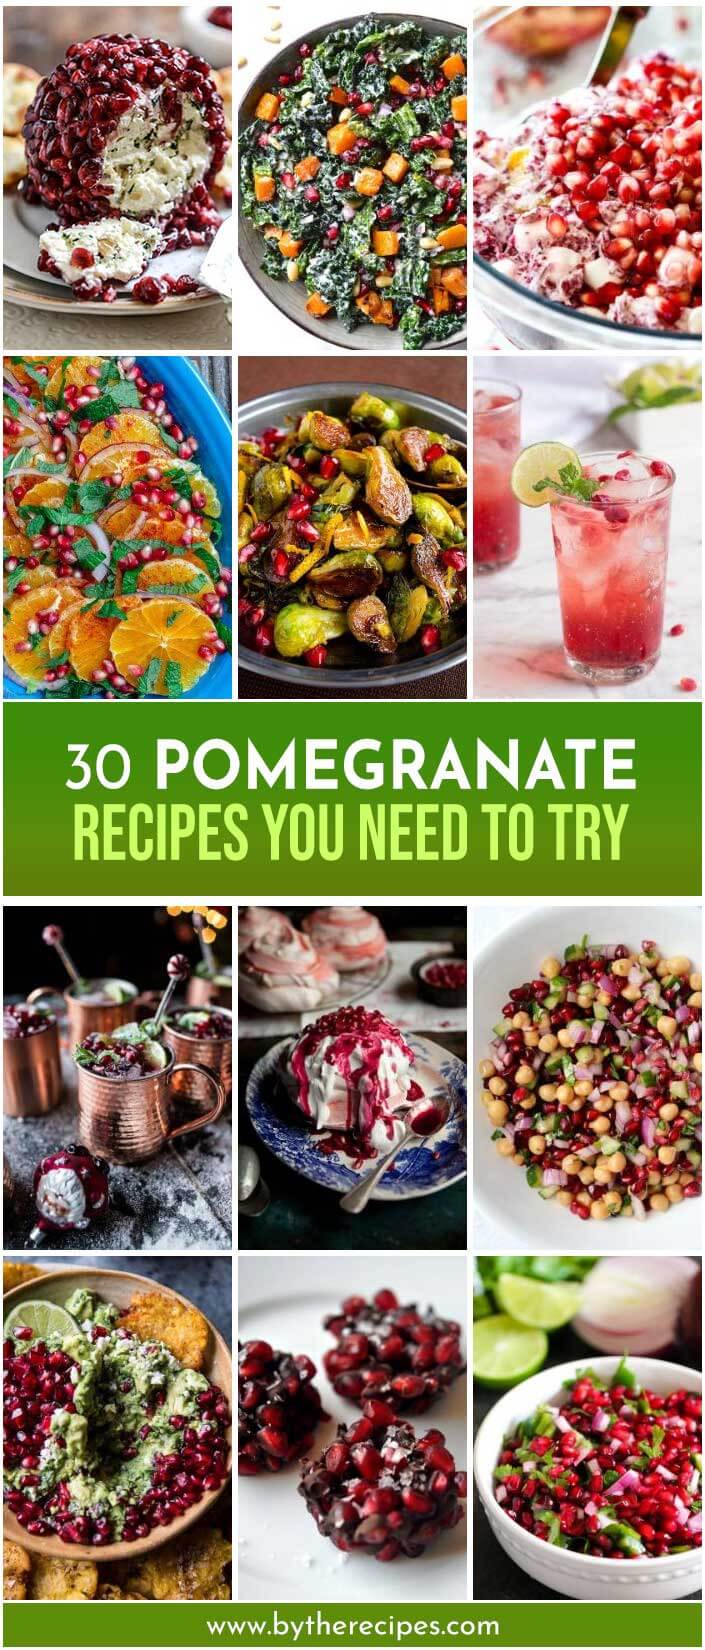 Here Are What To Make with Pomegranate!